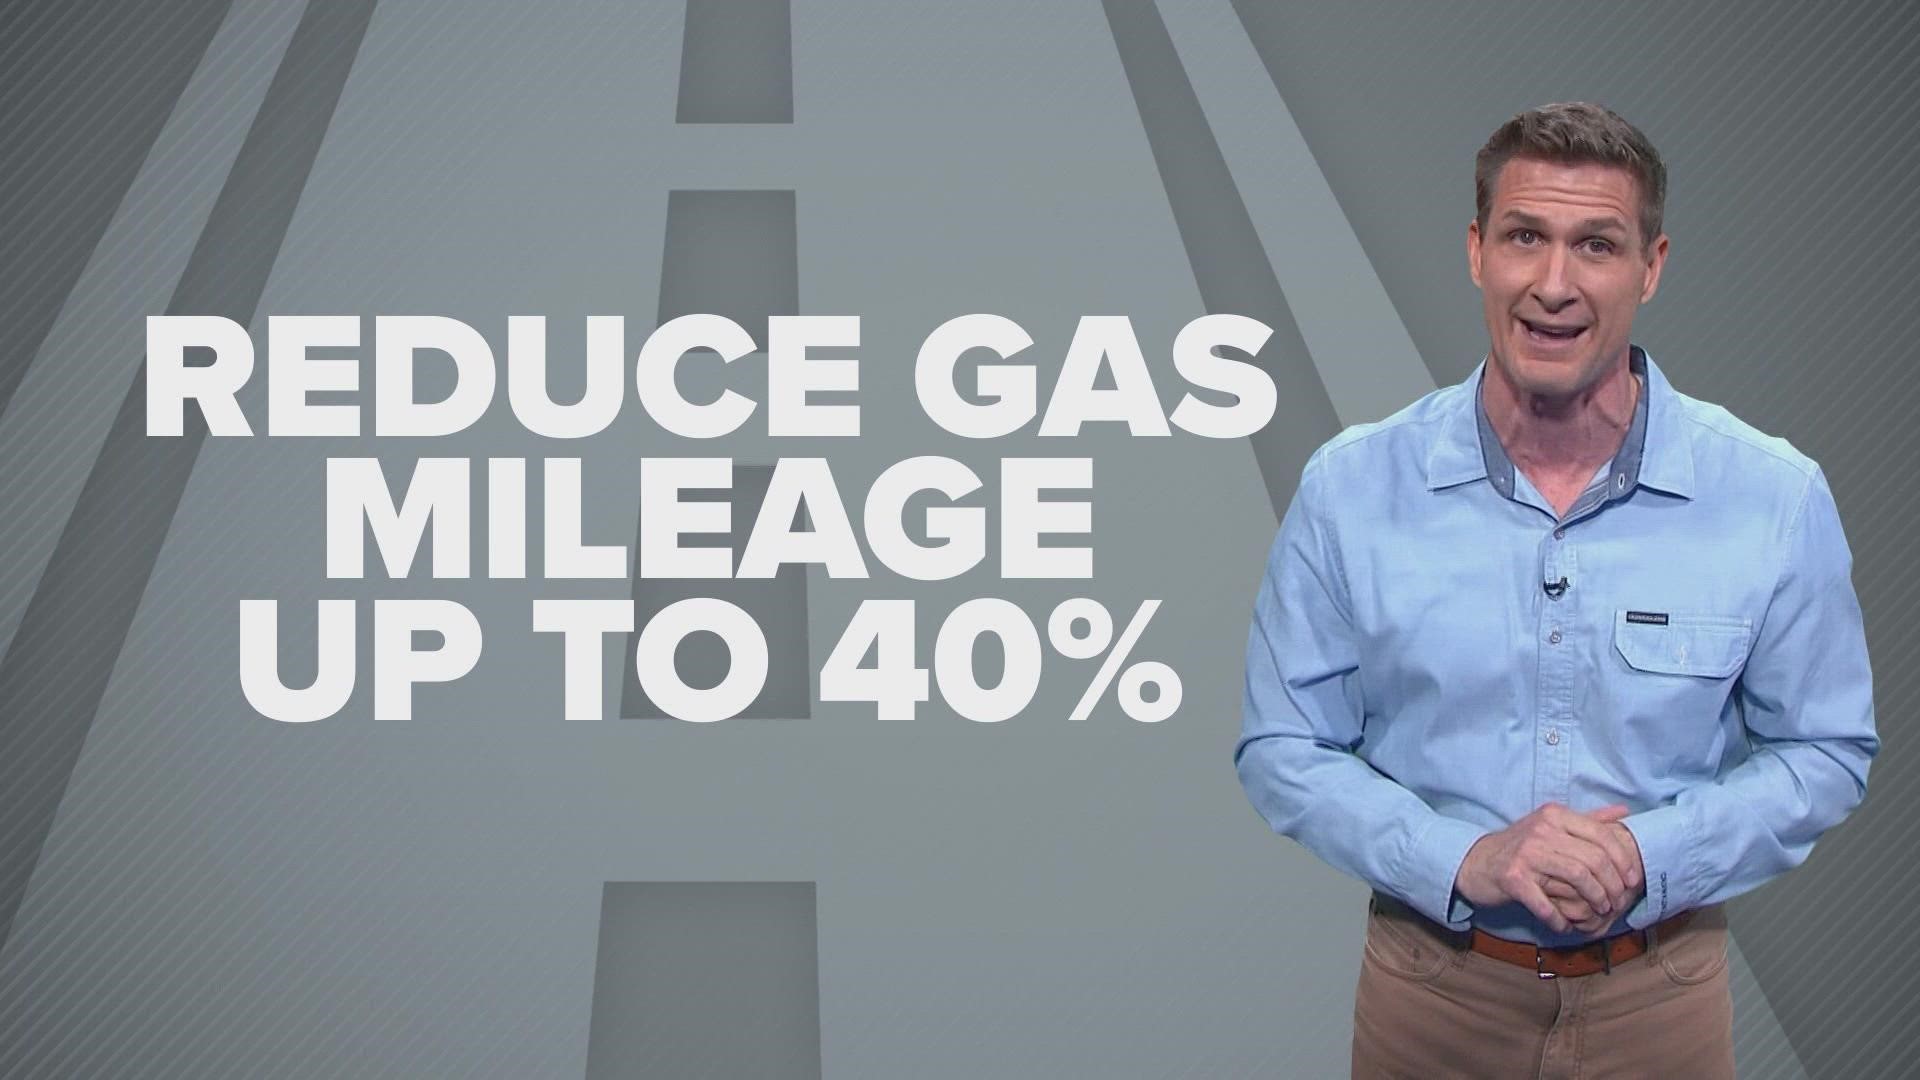 You may be paying a lot more per gallon than you think...